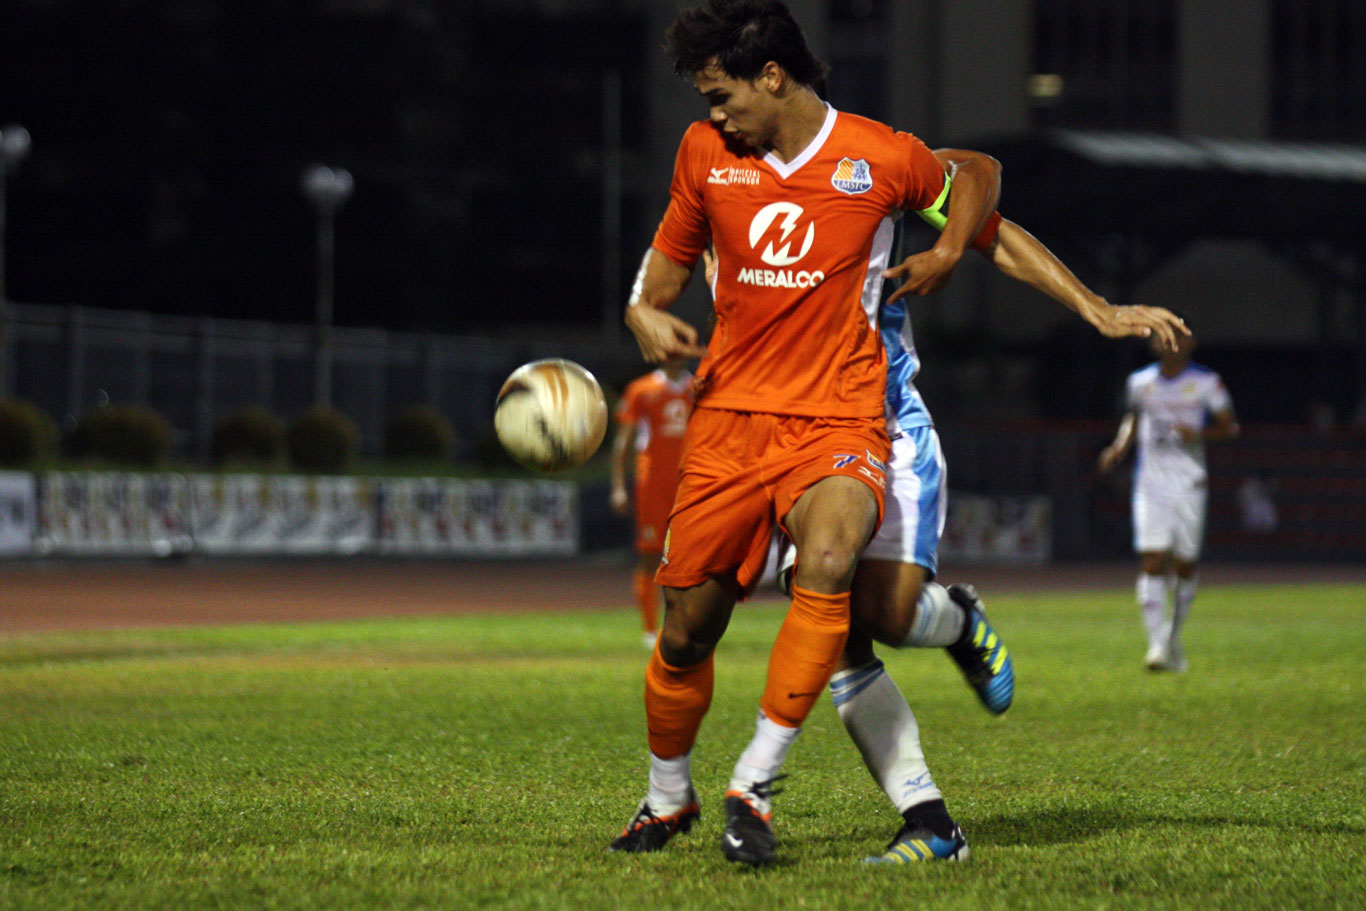 FIGHTING FOR THE PH. Loyola Meralco Sparks will return to the Singapore Cup to represent the Philippines in the quarterfinals. Icko de Guzman.